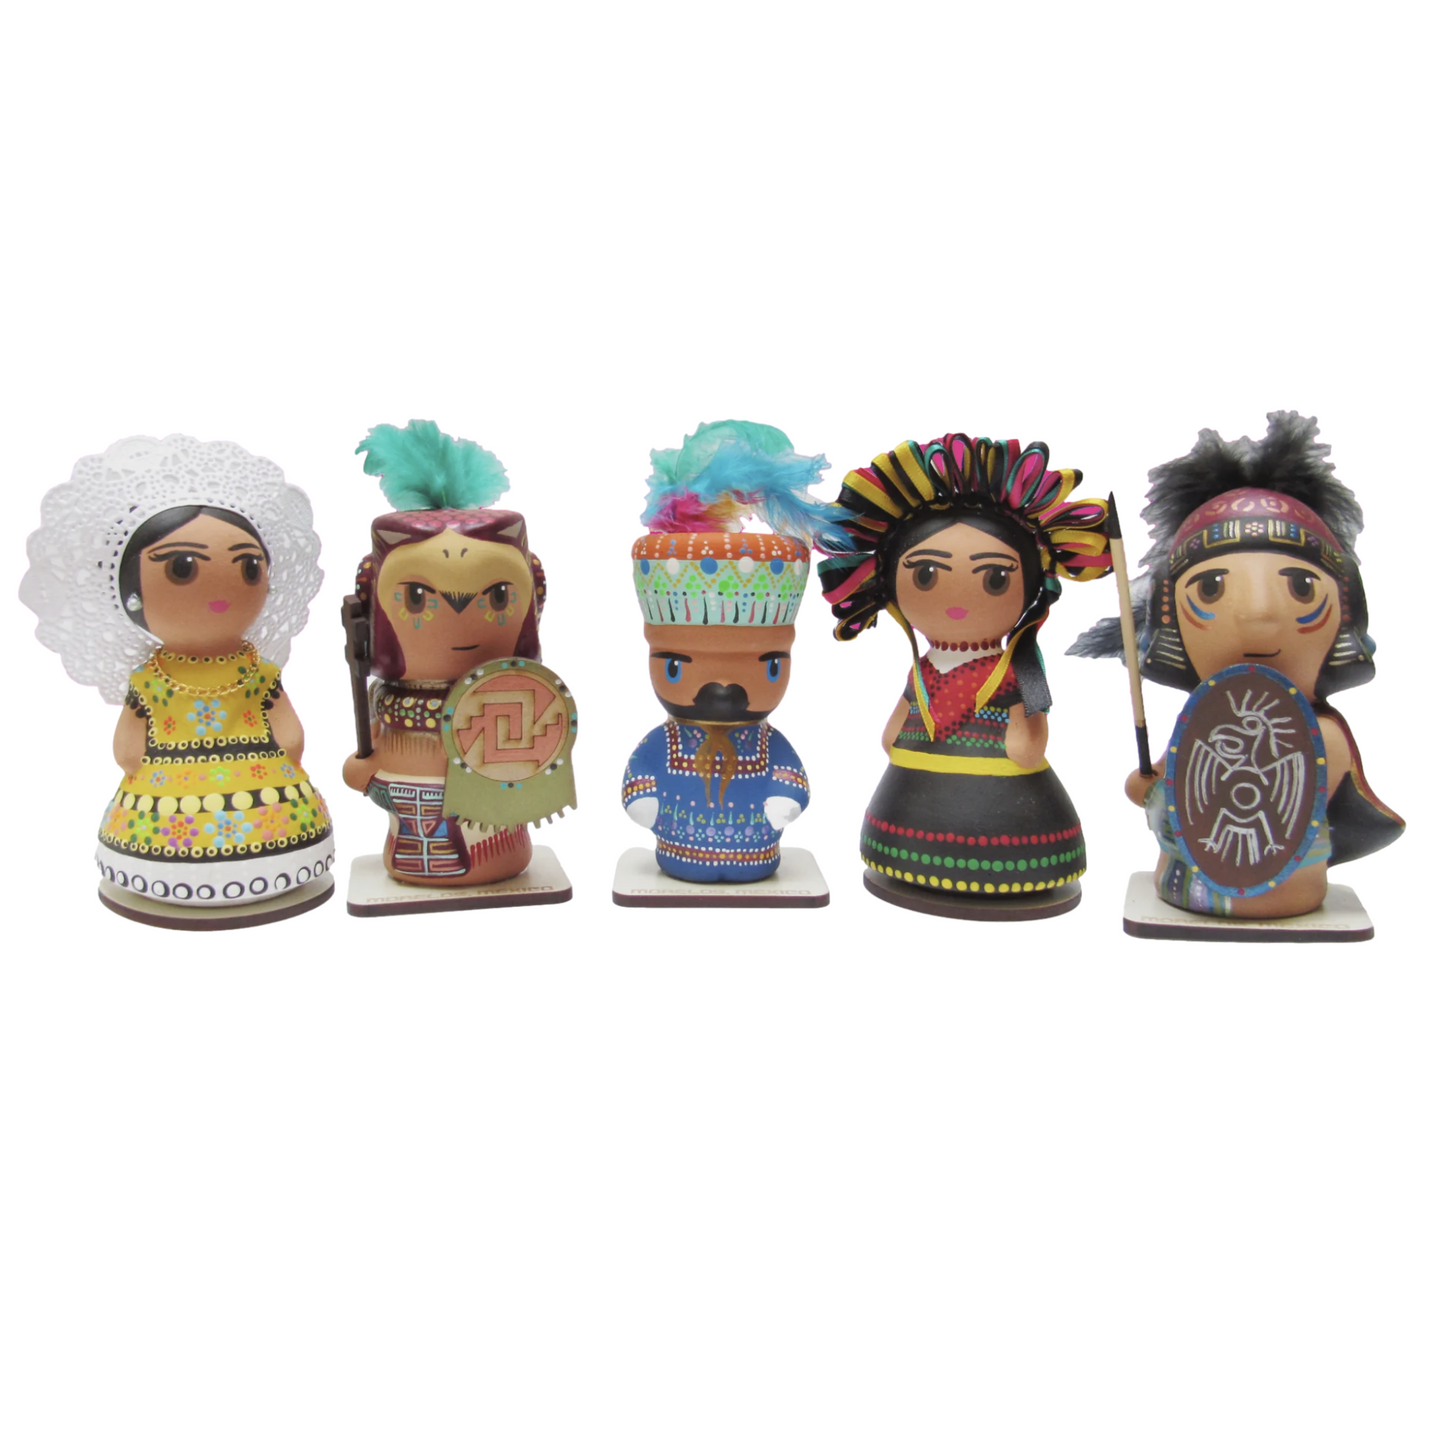 Mexican Handmade Clay Folklore Figurines- Sonora MeXican Artisan Fashion & Design